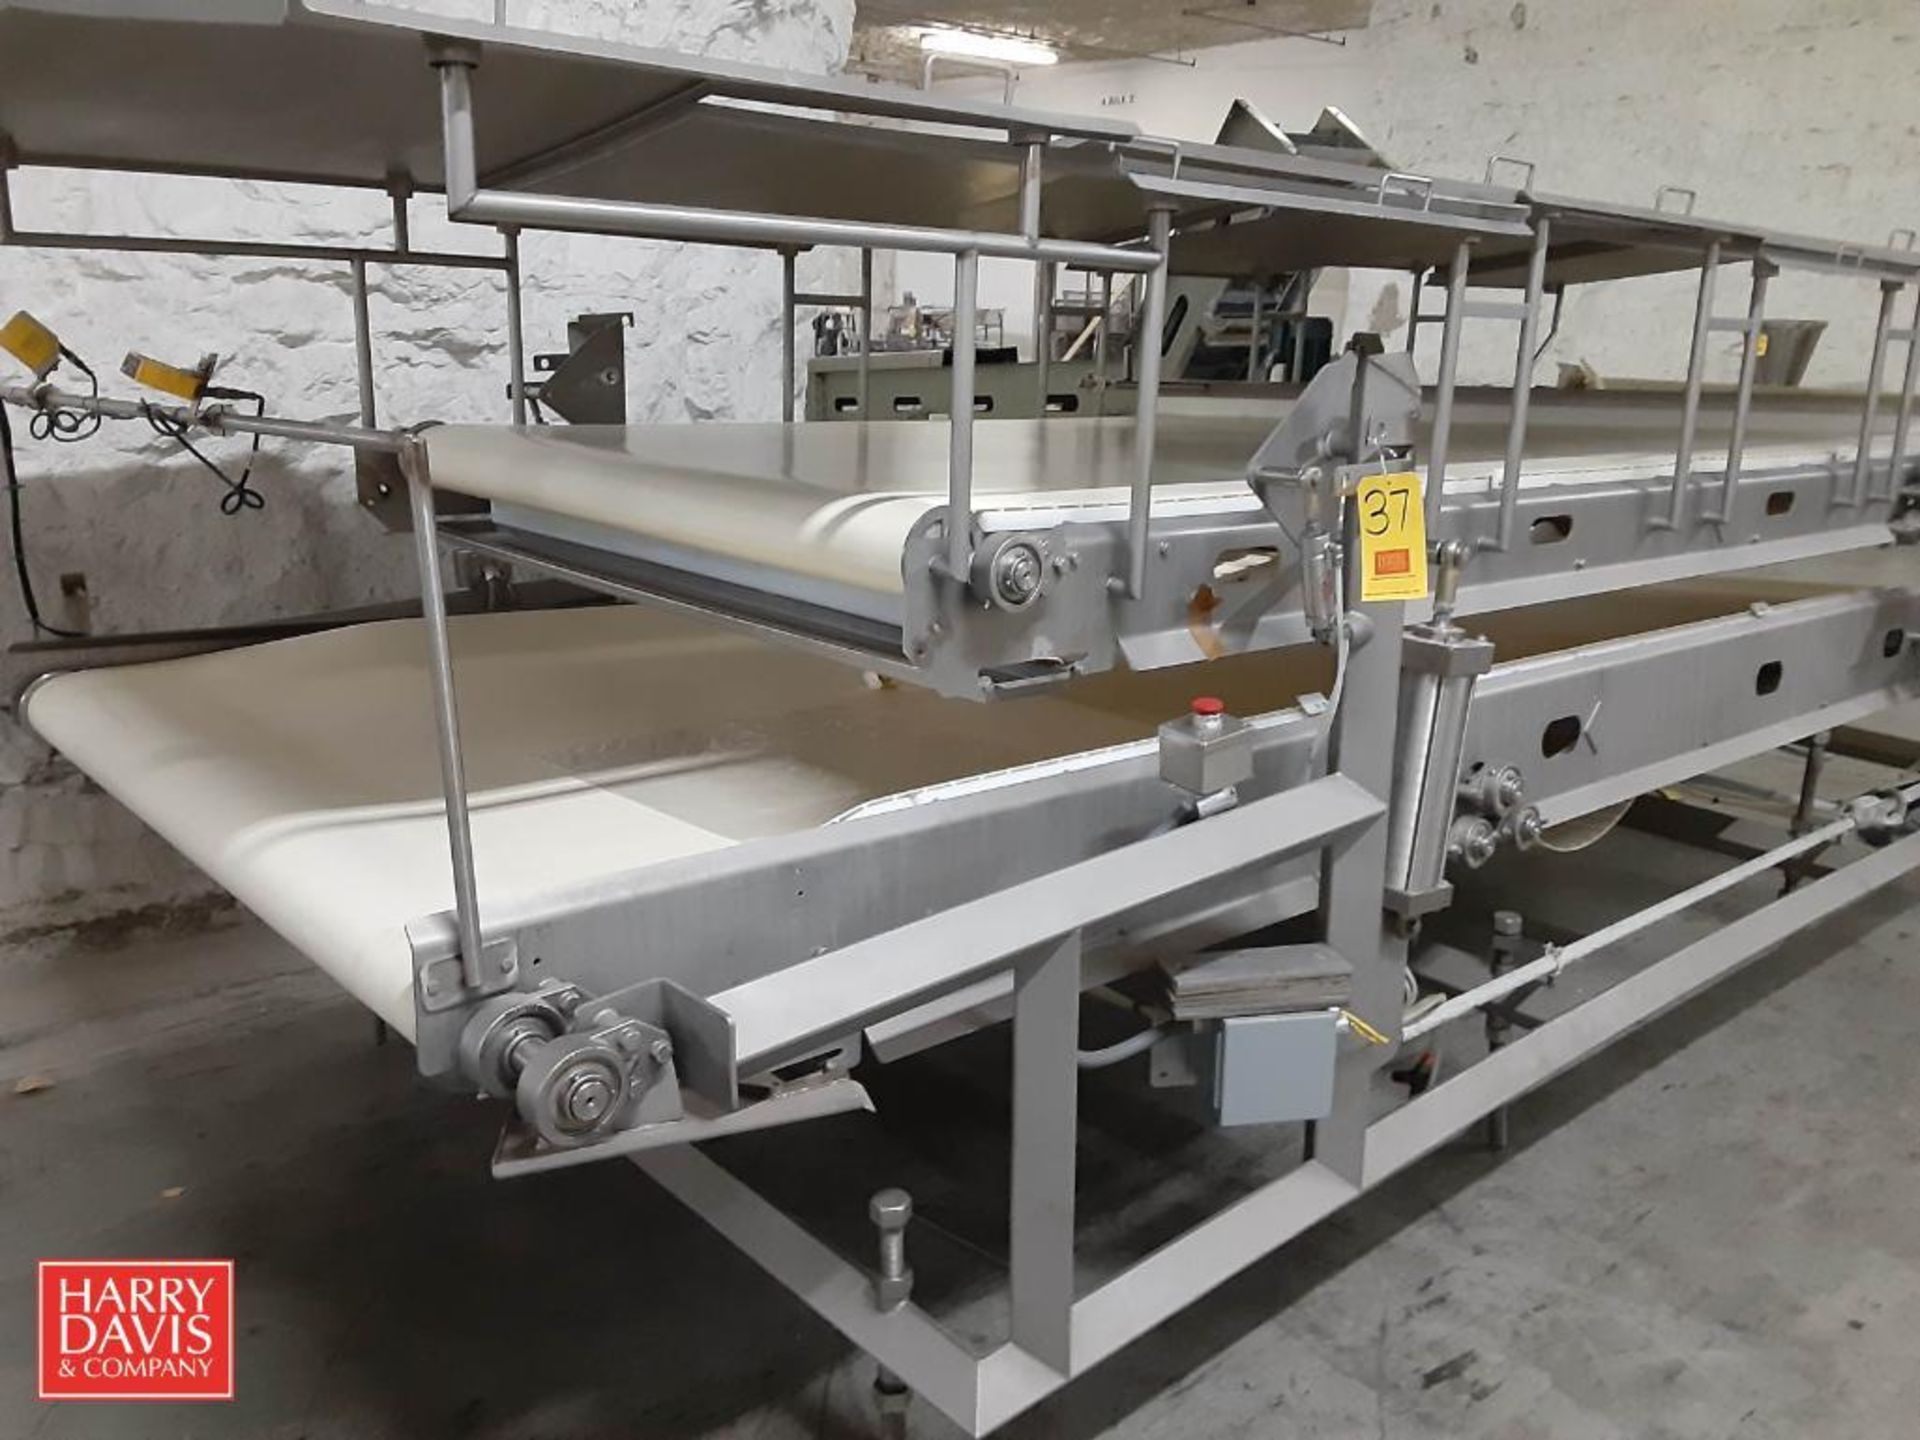 S/S Dual Level Powered Belt Conveyor with Pneumatic Height/Leveling Capability, S/S Top Drip Shield - Image 2 of 4